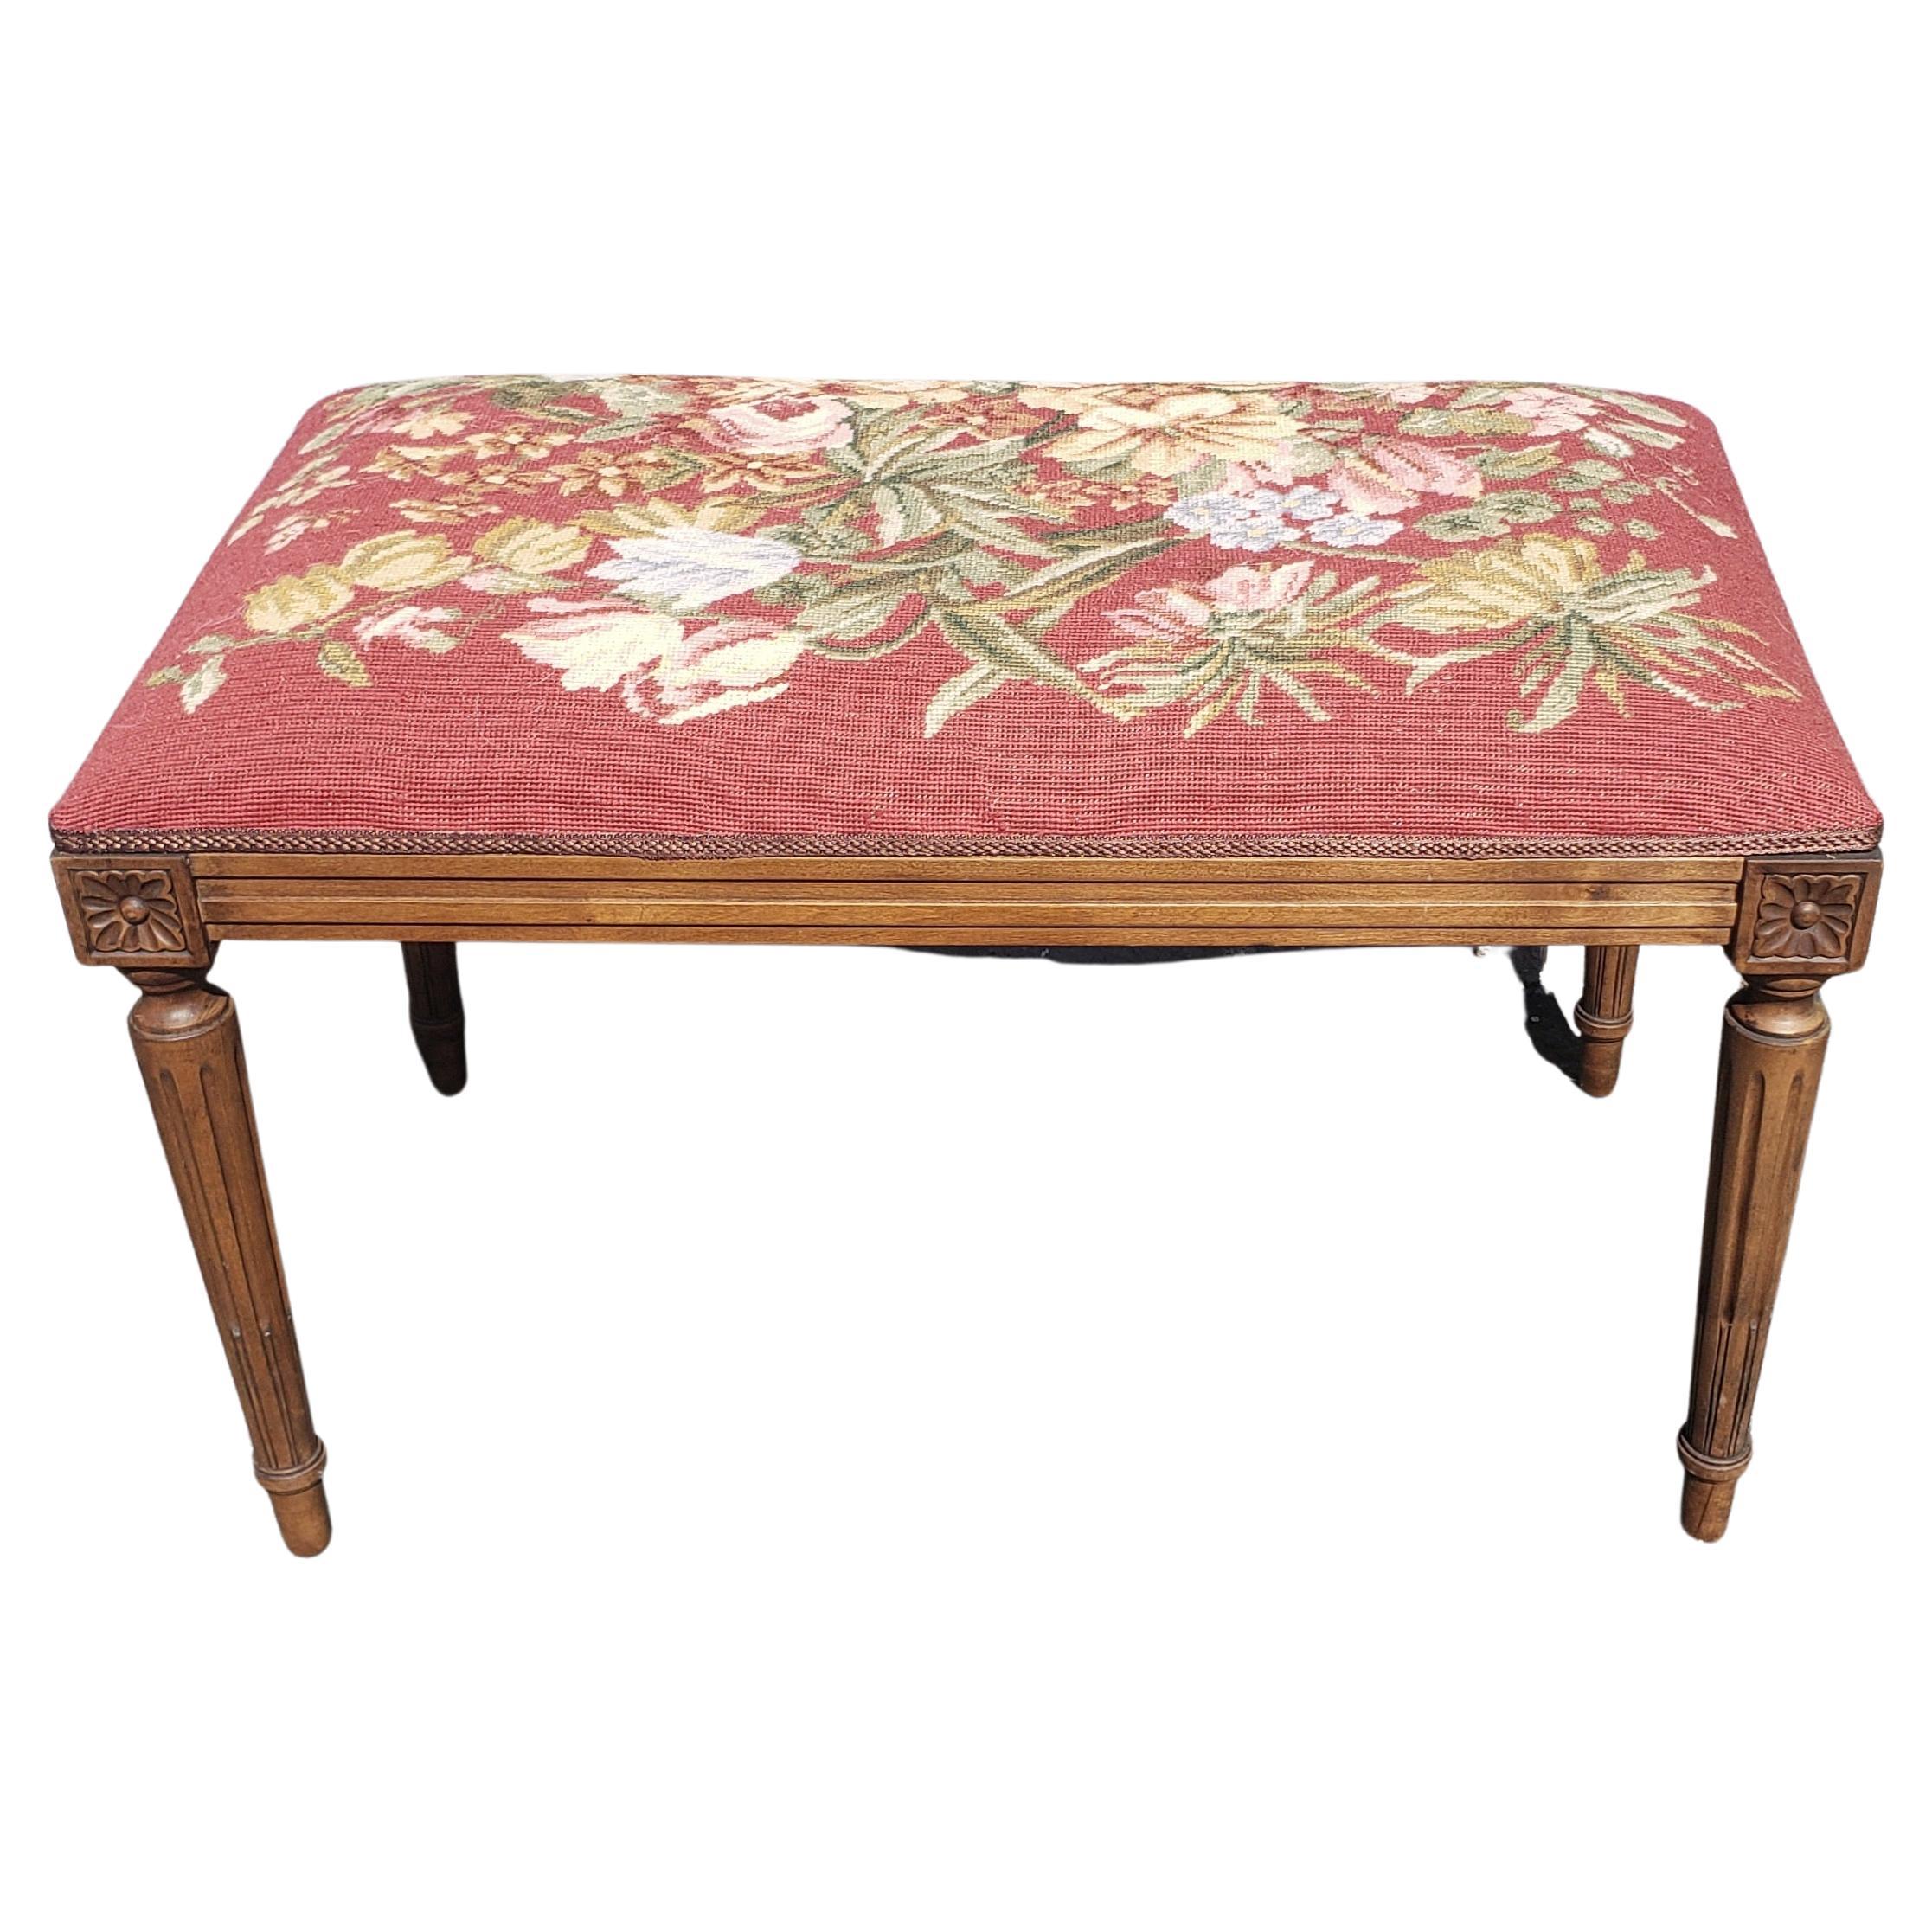 Louis XVI Style Walnut and Needlepoint Upholstered Tabouret Bench